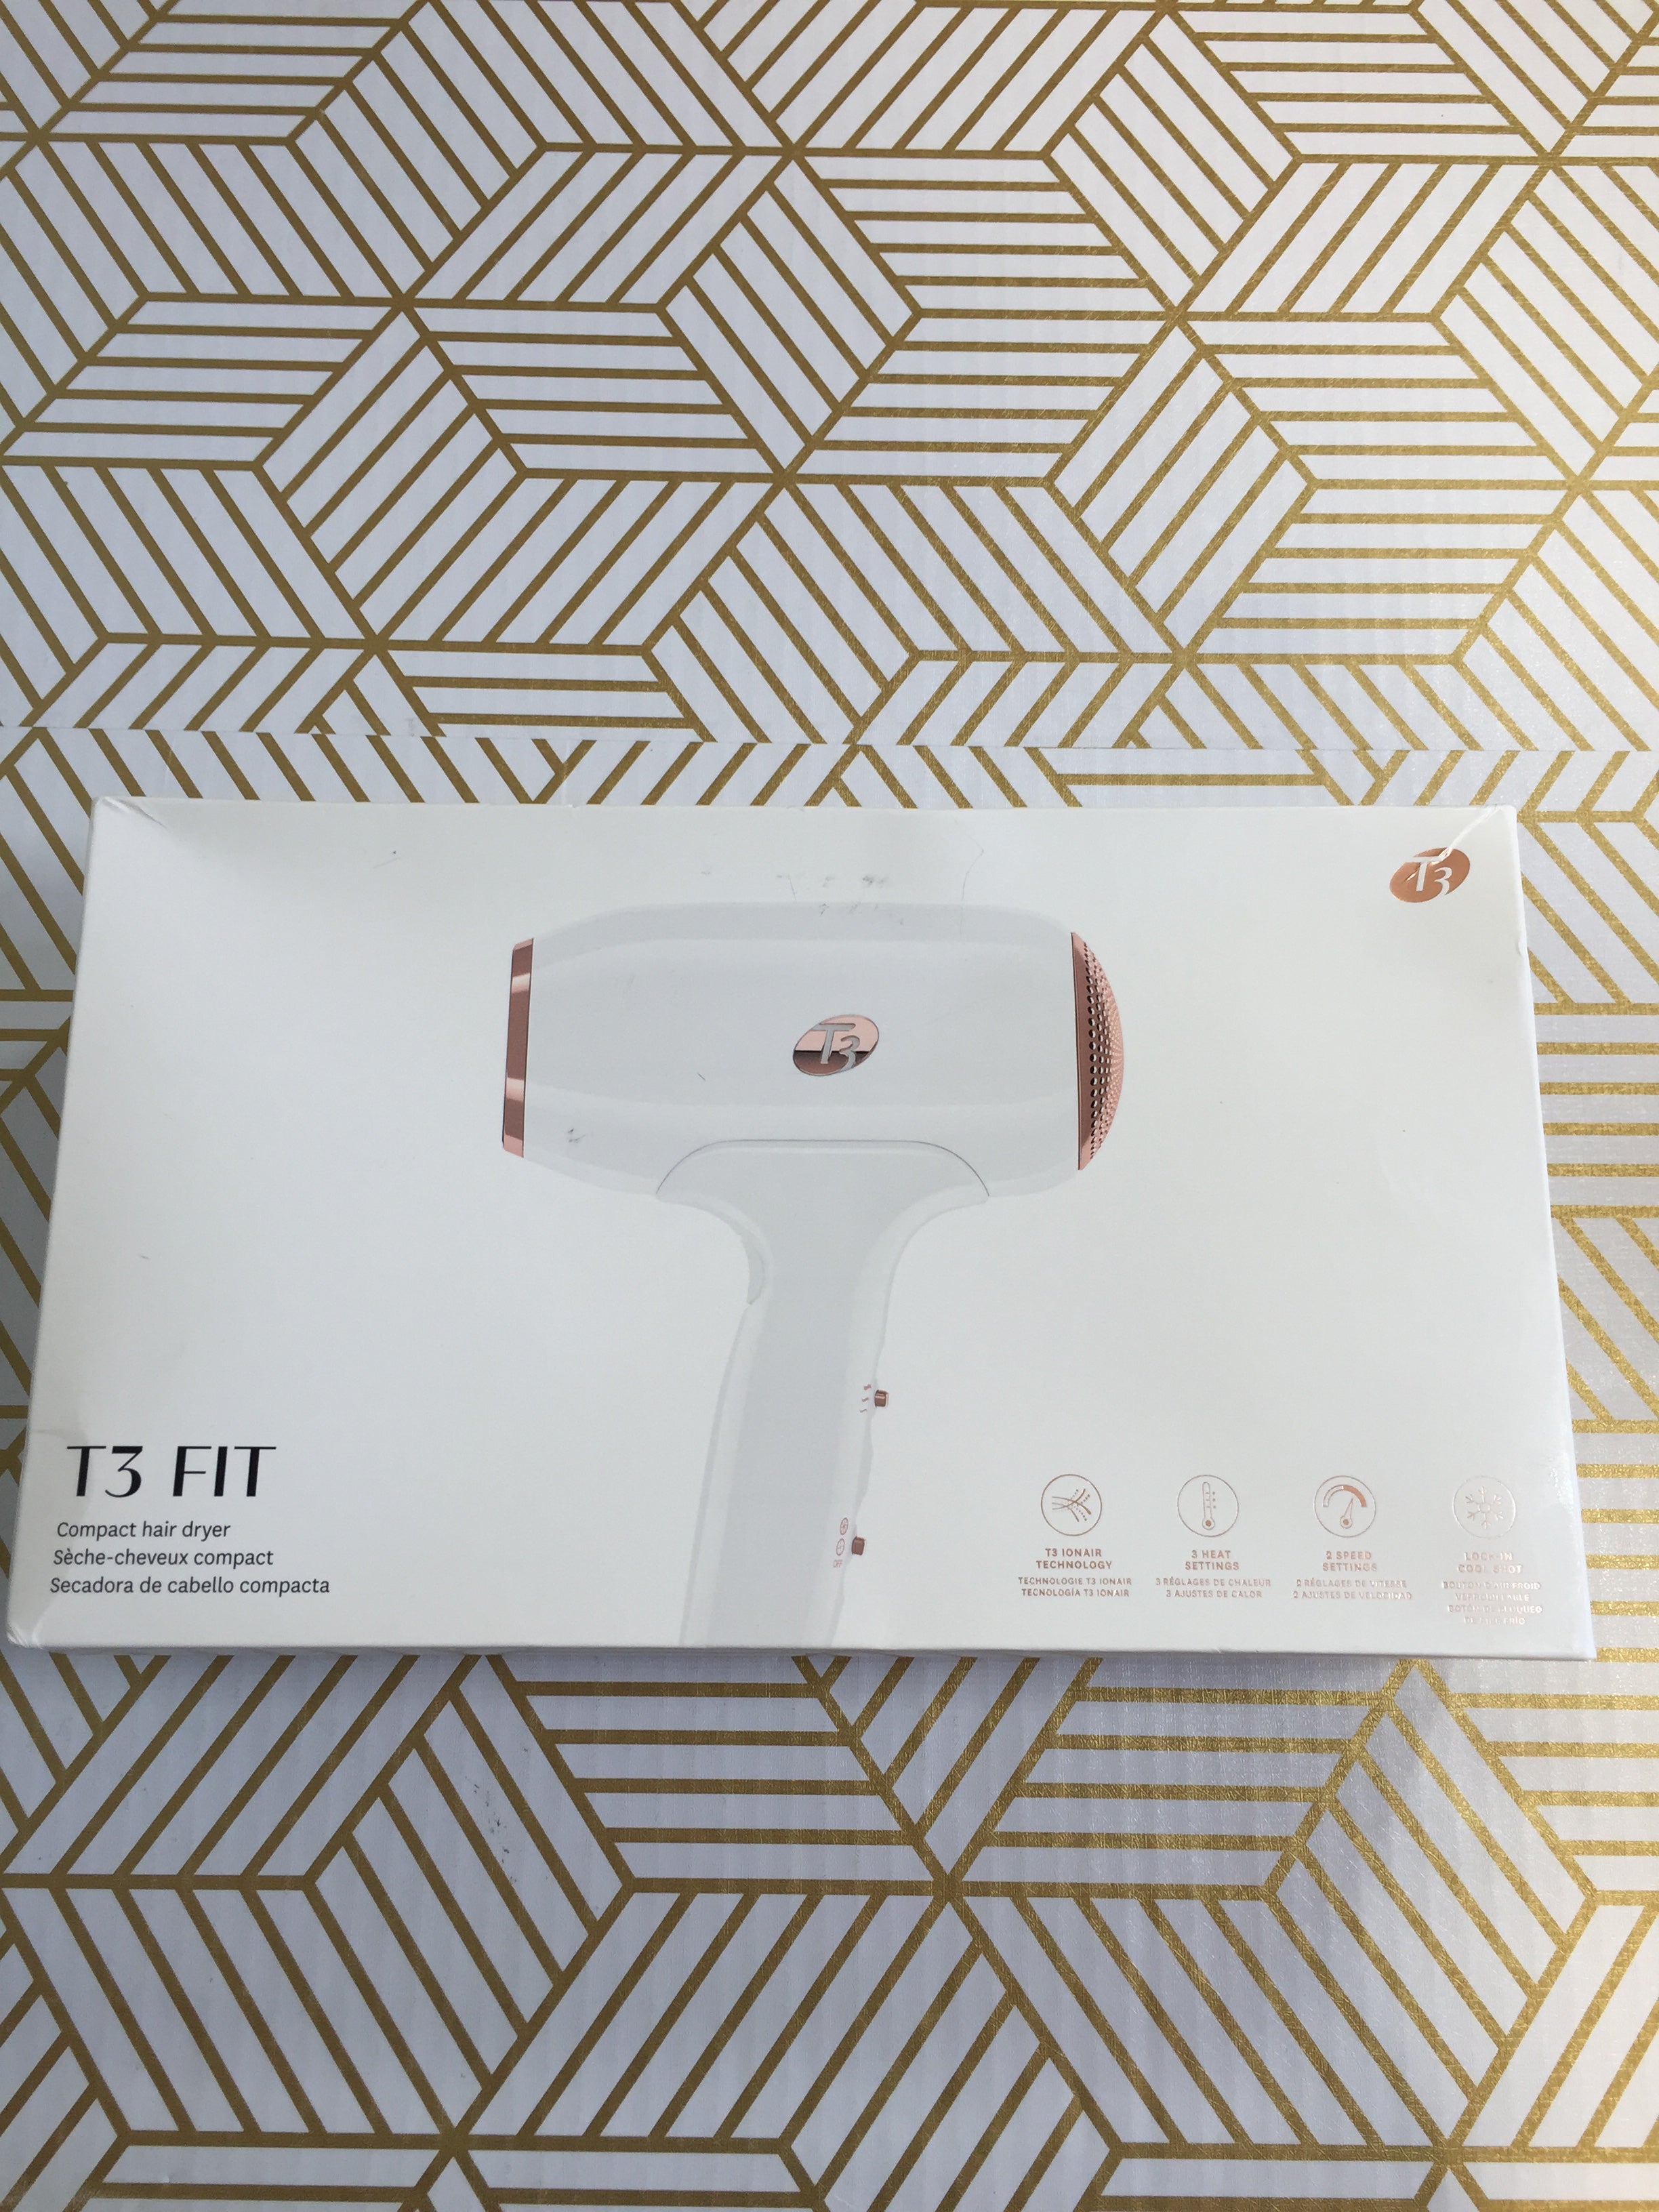 T3 Micro T3 Fit Ionic Compact Hair Dryer with IonAir Technology - OPEN BOX (7677037805806)